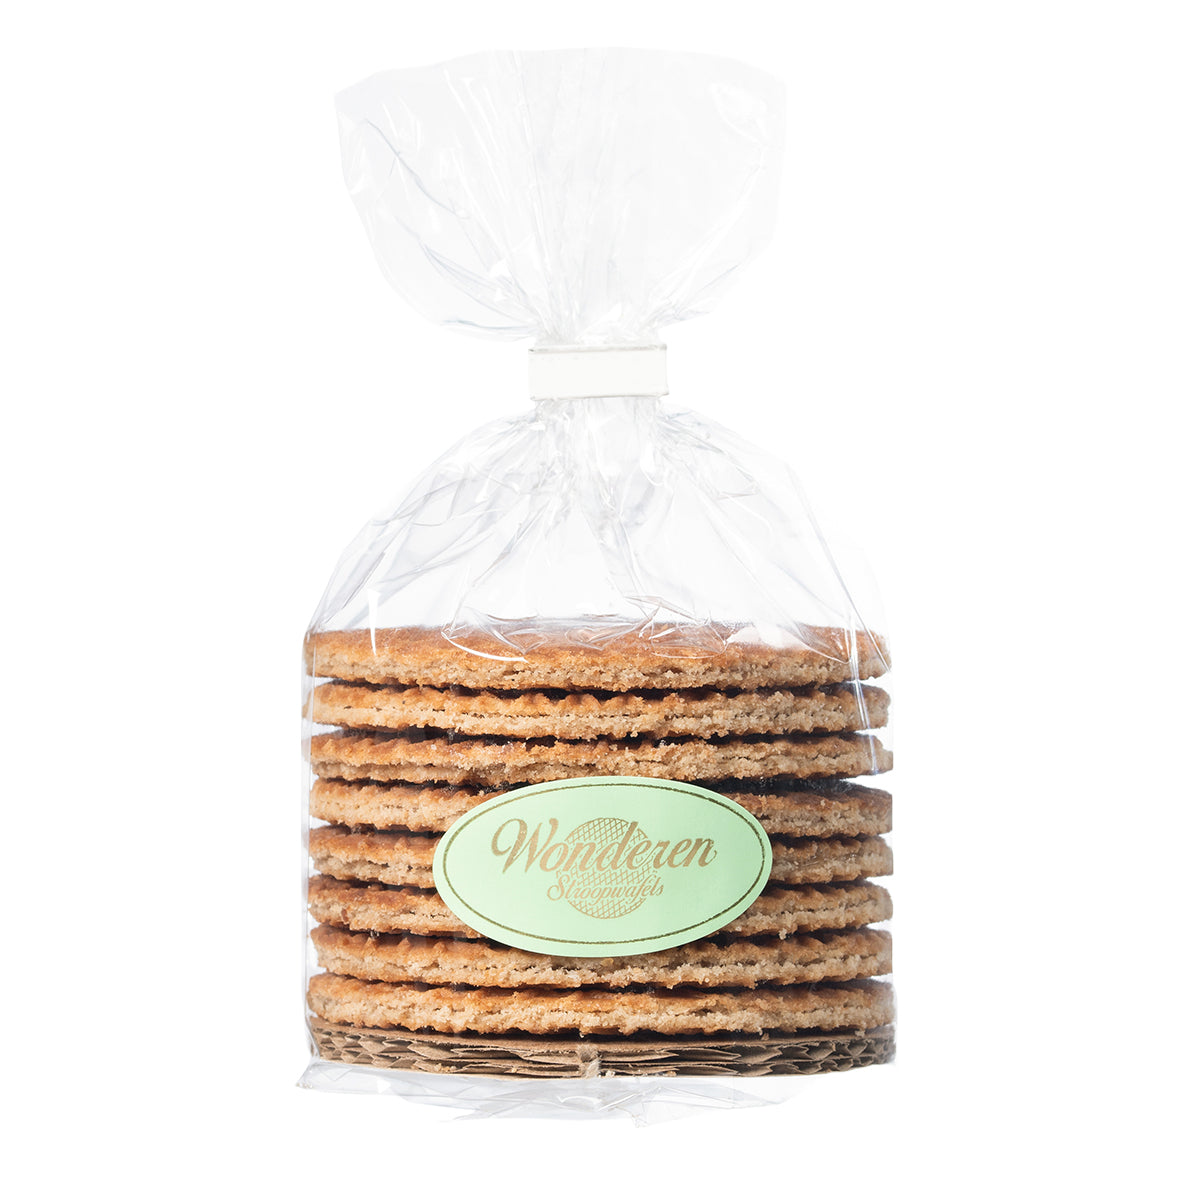 A stack of Authentic Red Stroopwafel Tin Cans by Wonderen Stroopwafels in a plastic bag on a white background.